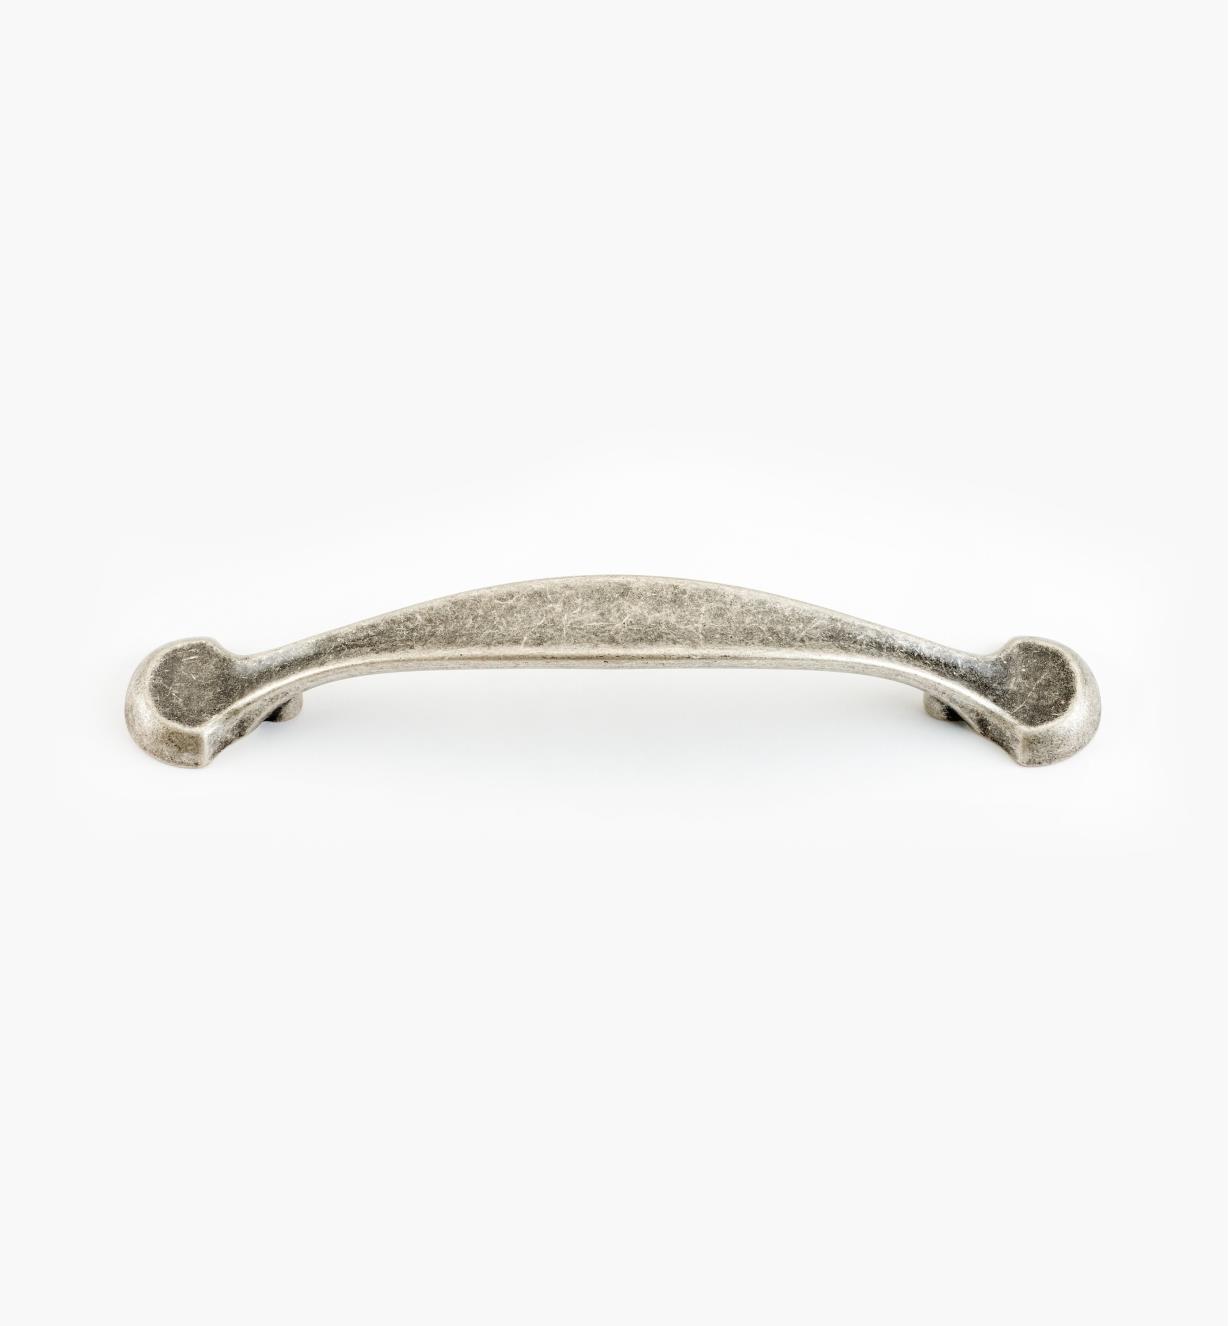 00A7216 - 128mm Old Silver Handle (7 3/8")